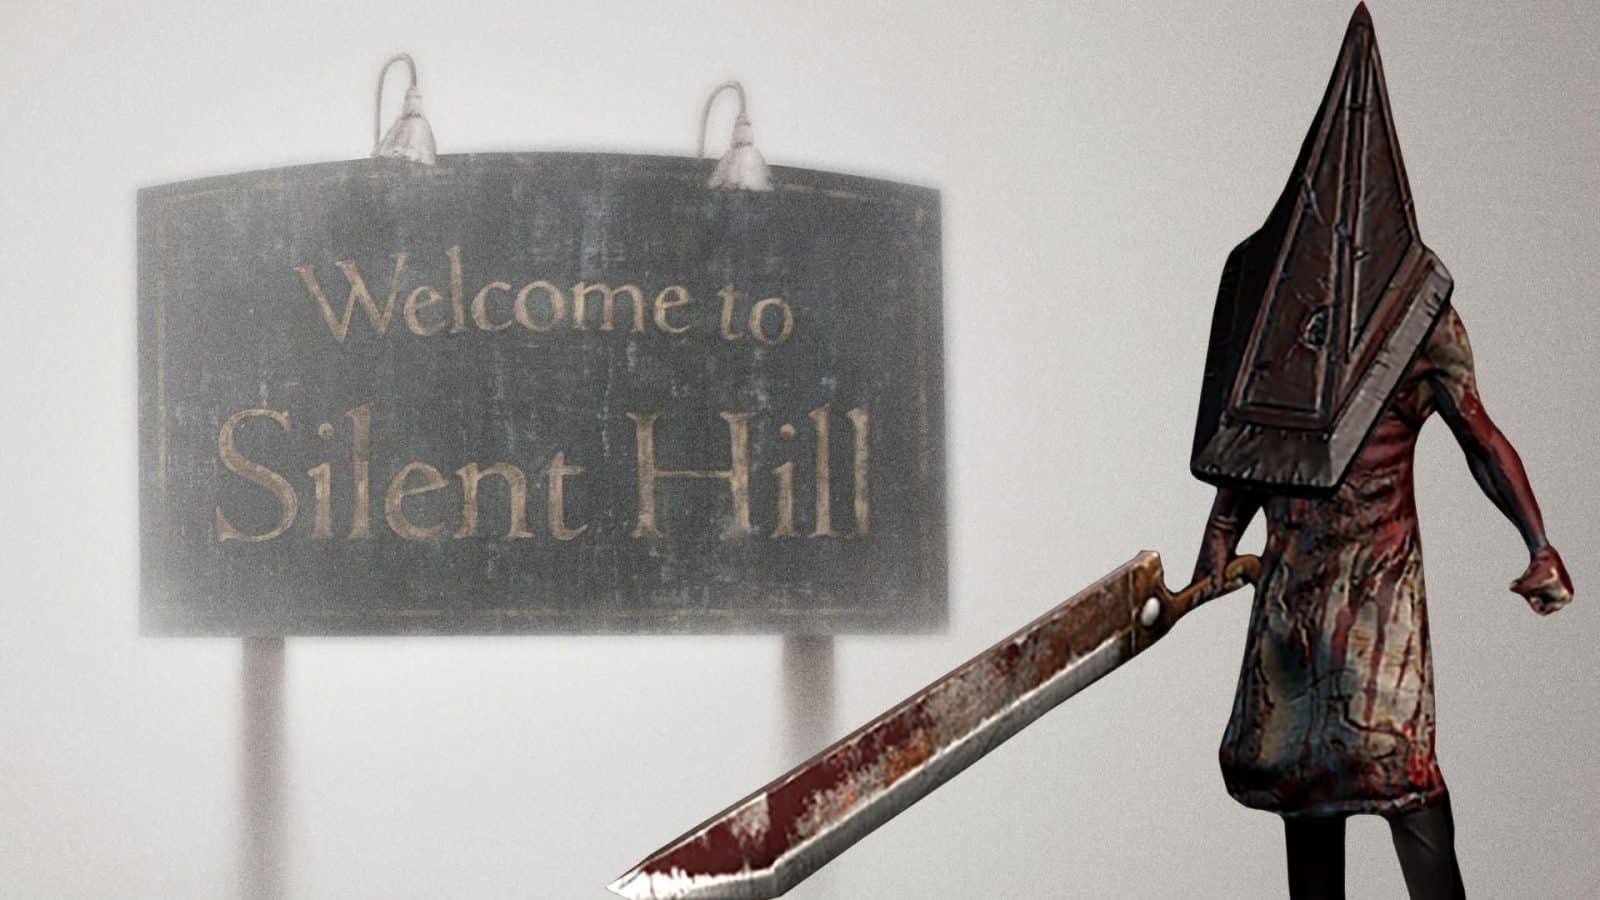 Silent Hill f is the Next Mainline Entry in the Horror Franchise